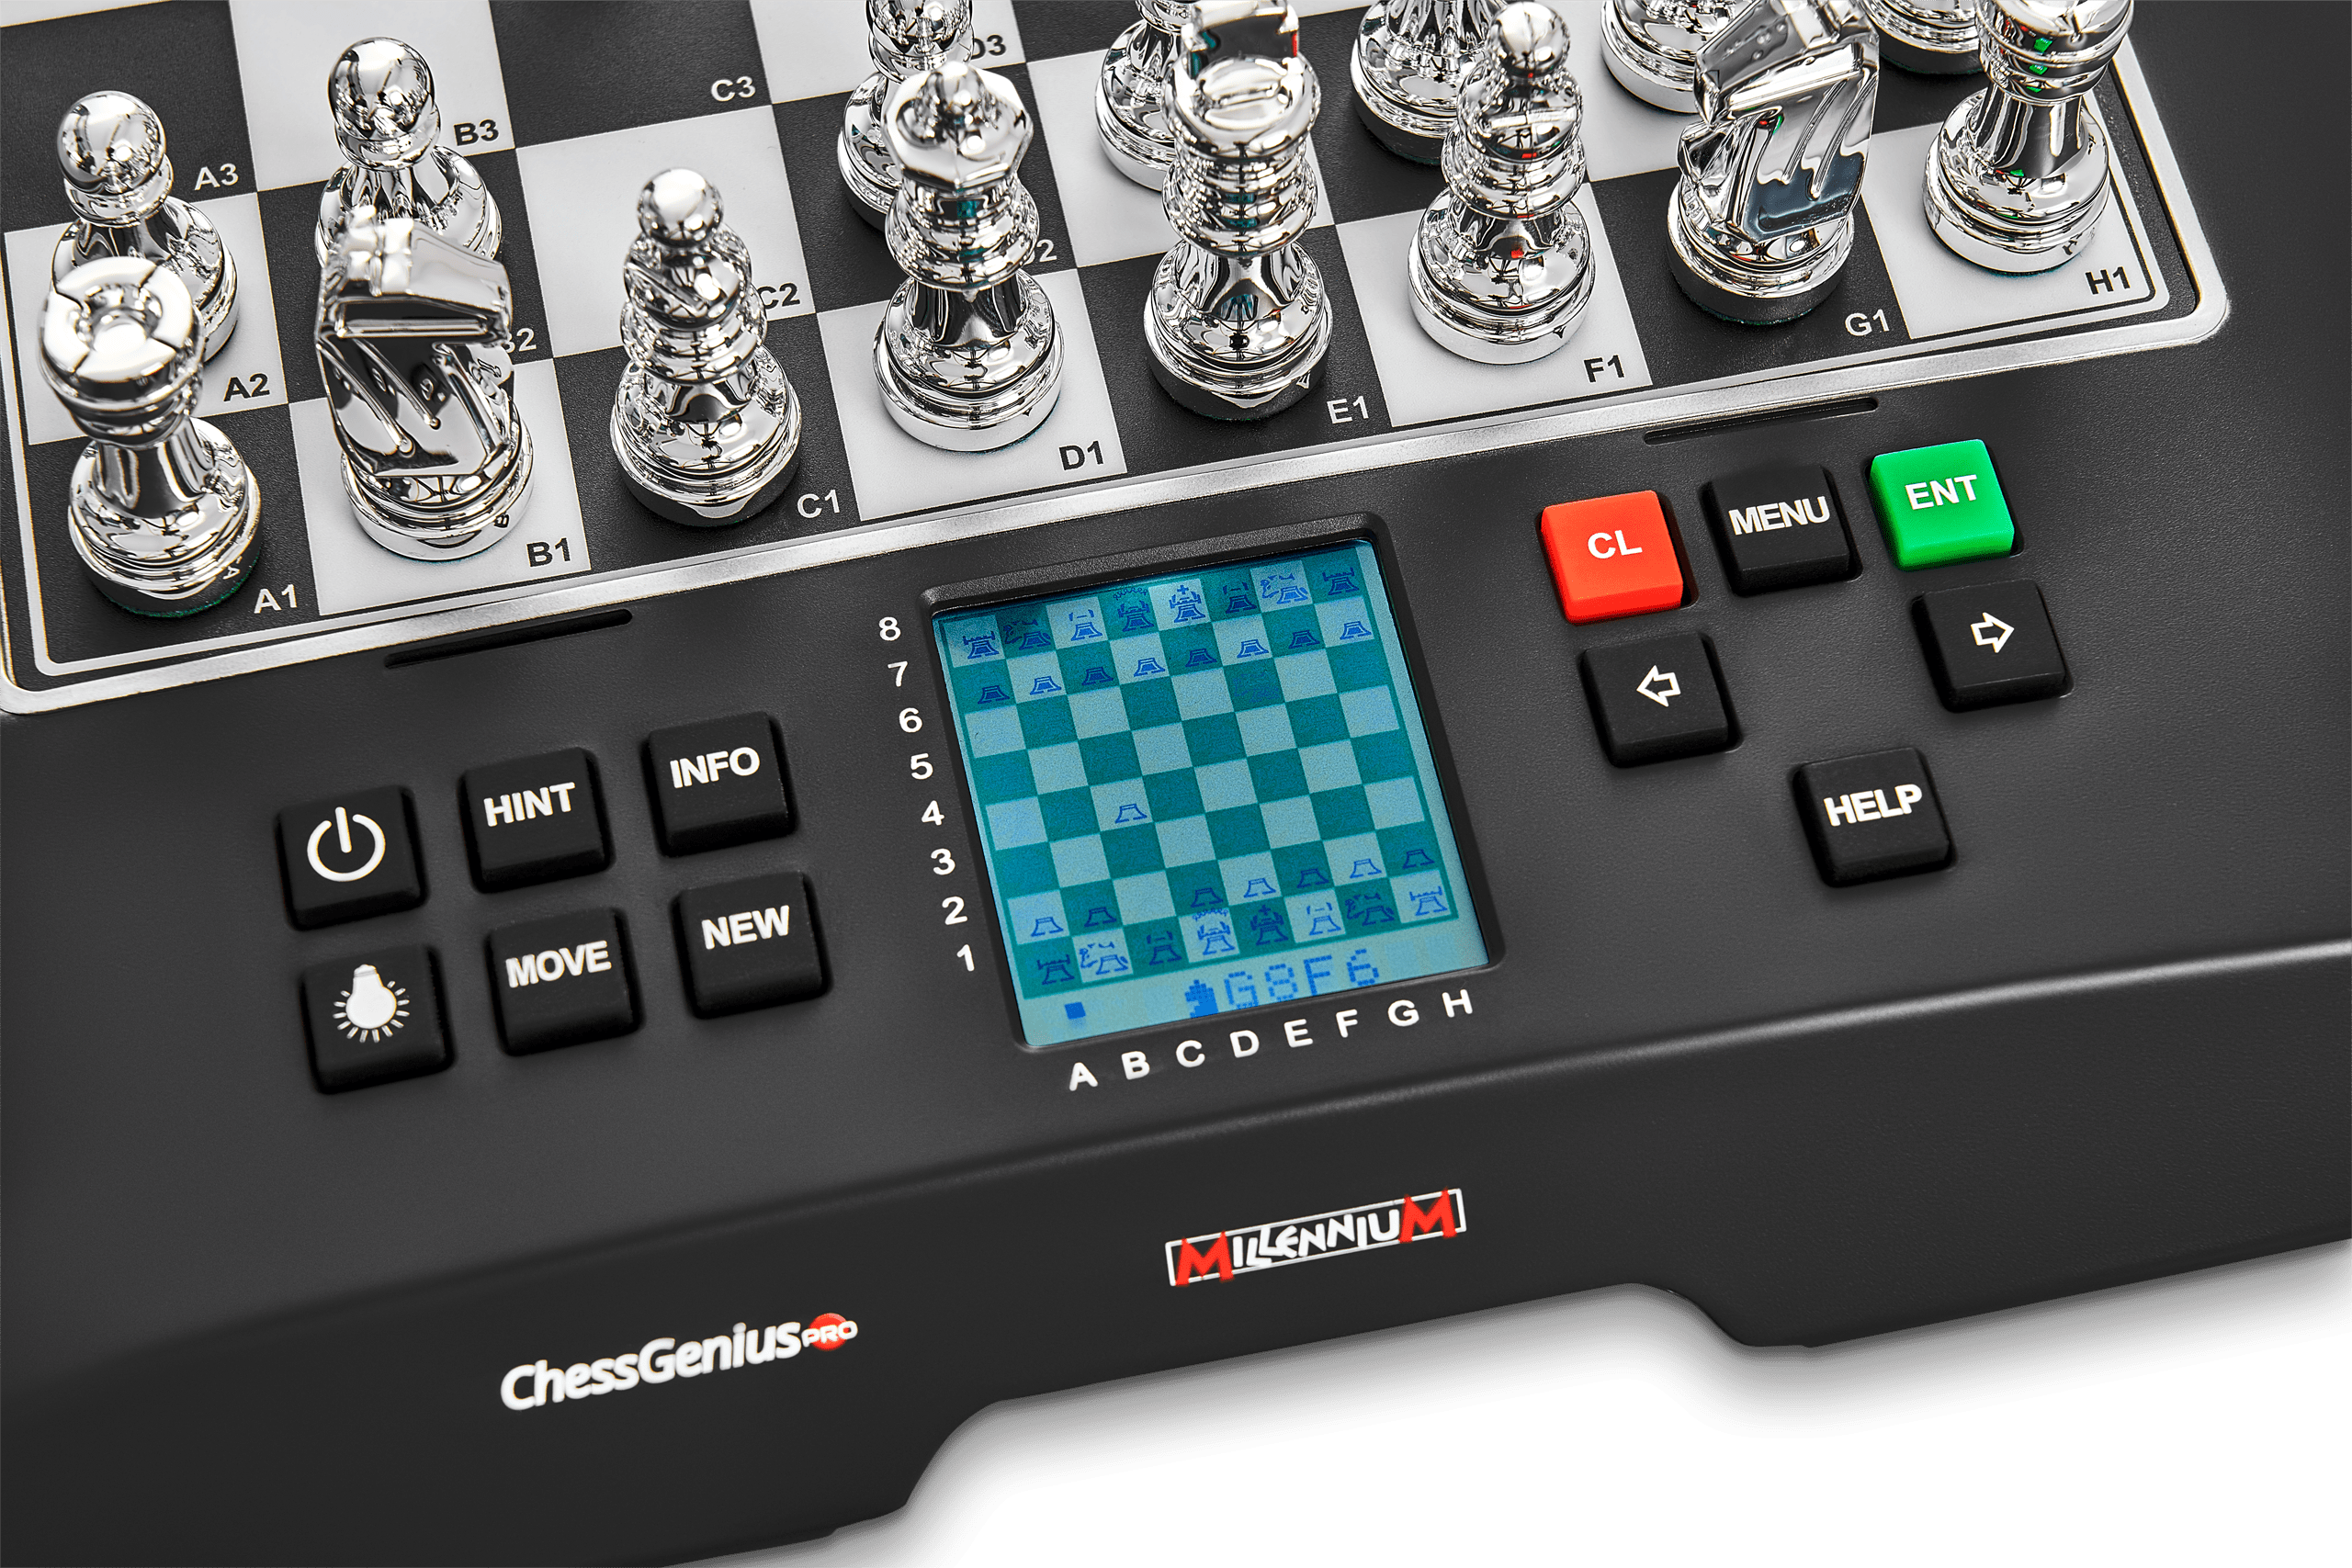 DEAL ITEM: Millennium Chess Computer - Chess Genius PRO - SPECIAL EDITION with Box - Open Box - Chess-House